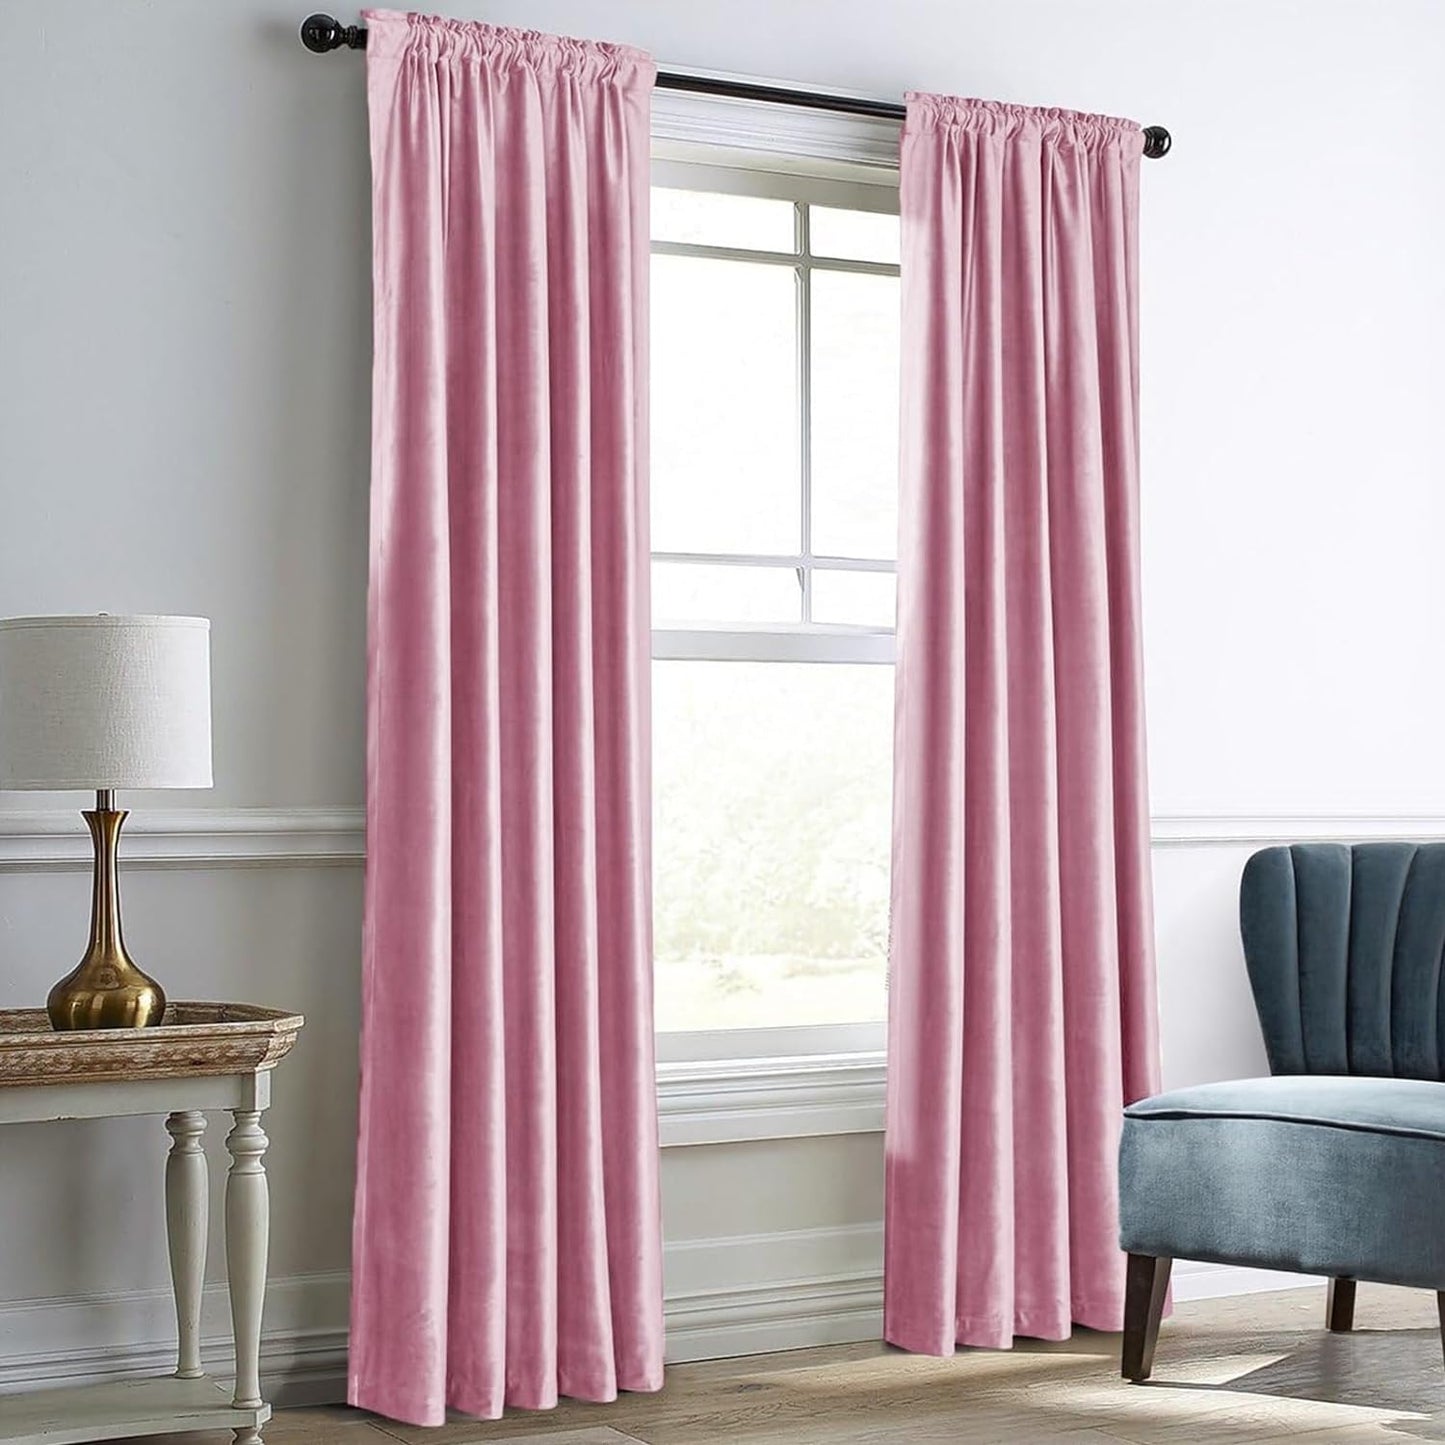 Dreaming Casa Royal Blue Velvet Room Darkening Curtains for Living Room Thermal Insulated Rod Pocket Back Tab Window Curtain for Bedroom 2 Panels 102 Inches Long, 42" W X 102" L  Dreaming Casa Rose Pink 2 X (52"W X 108"L) 